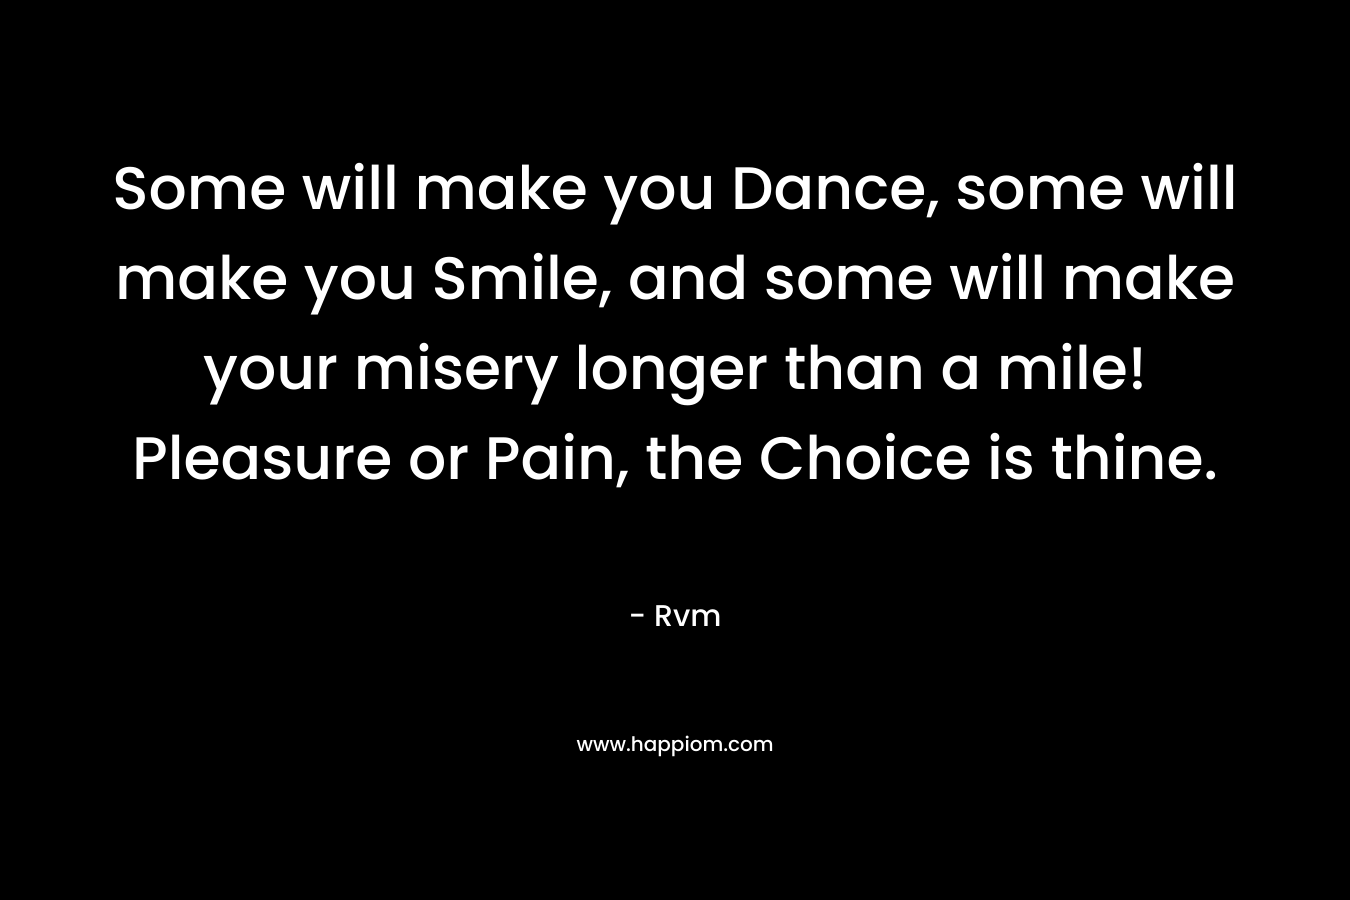 Some will make you Dance, some will make you Smile, and some will make your misery longer than a mile! Pleasure or Pain, the Choice is thine. – Rvm